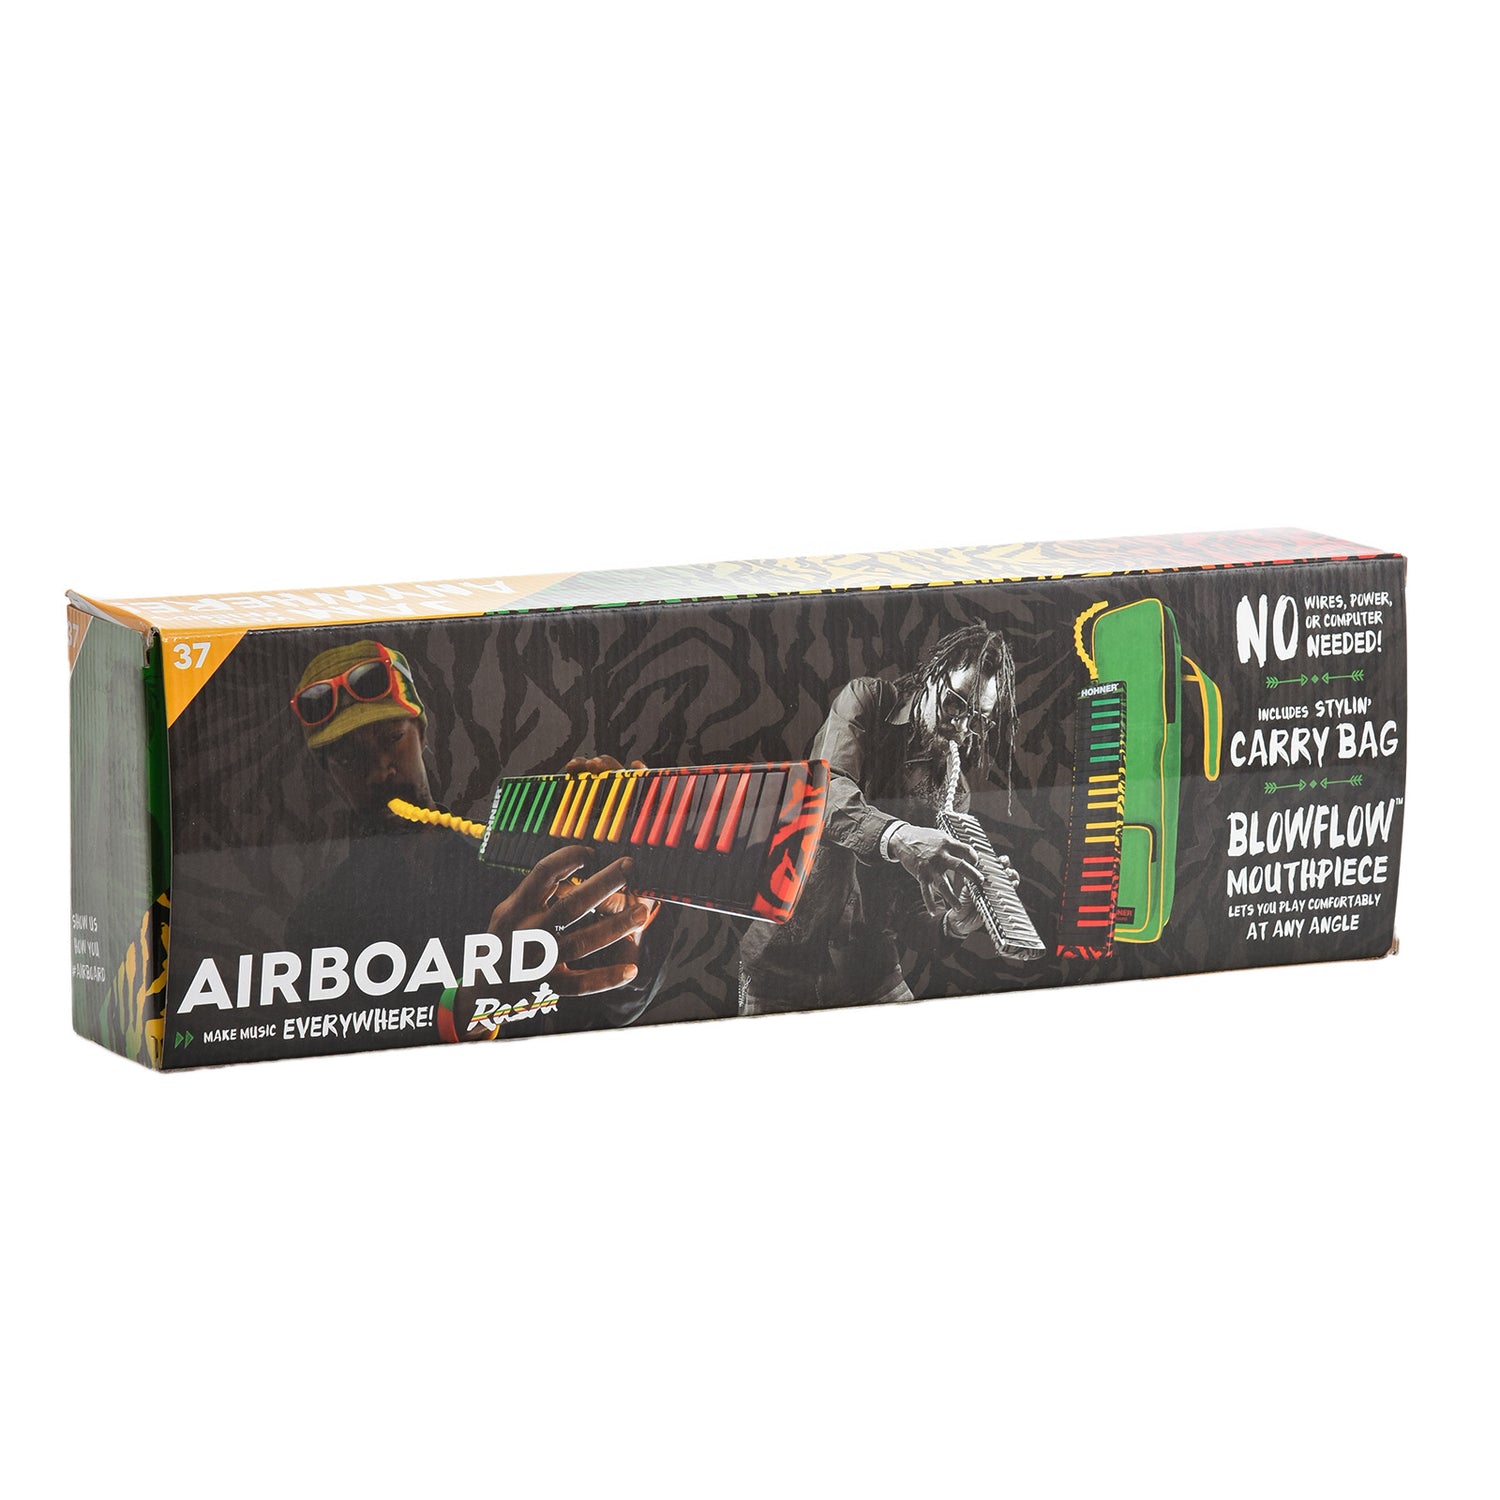 Image 3 of Hohner Airboard 37 37-Key Air-Powered Keyboard, Rasta Design/Colors - SKU# AB37R : Product Type Wind Instruments : Elderly Instruments